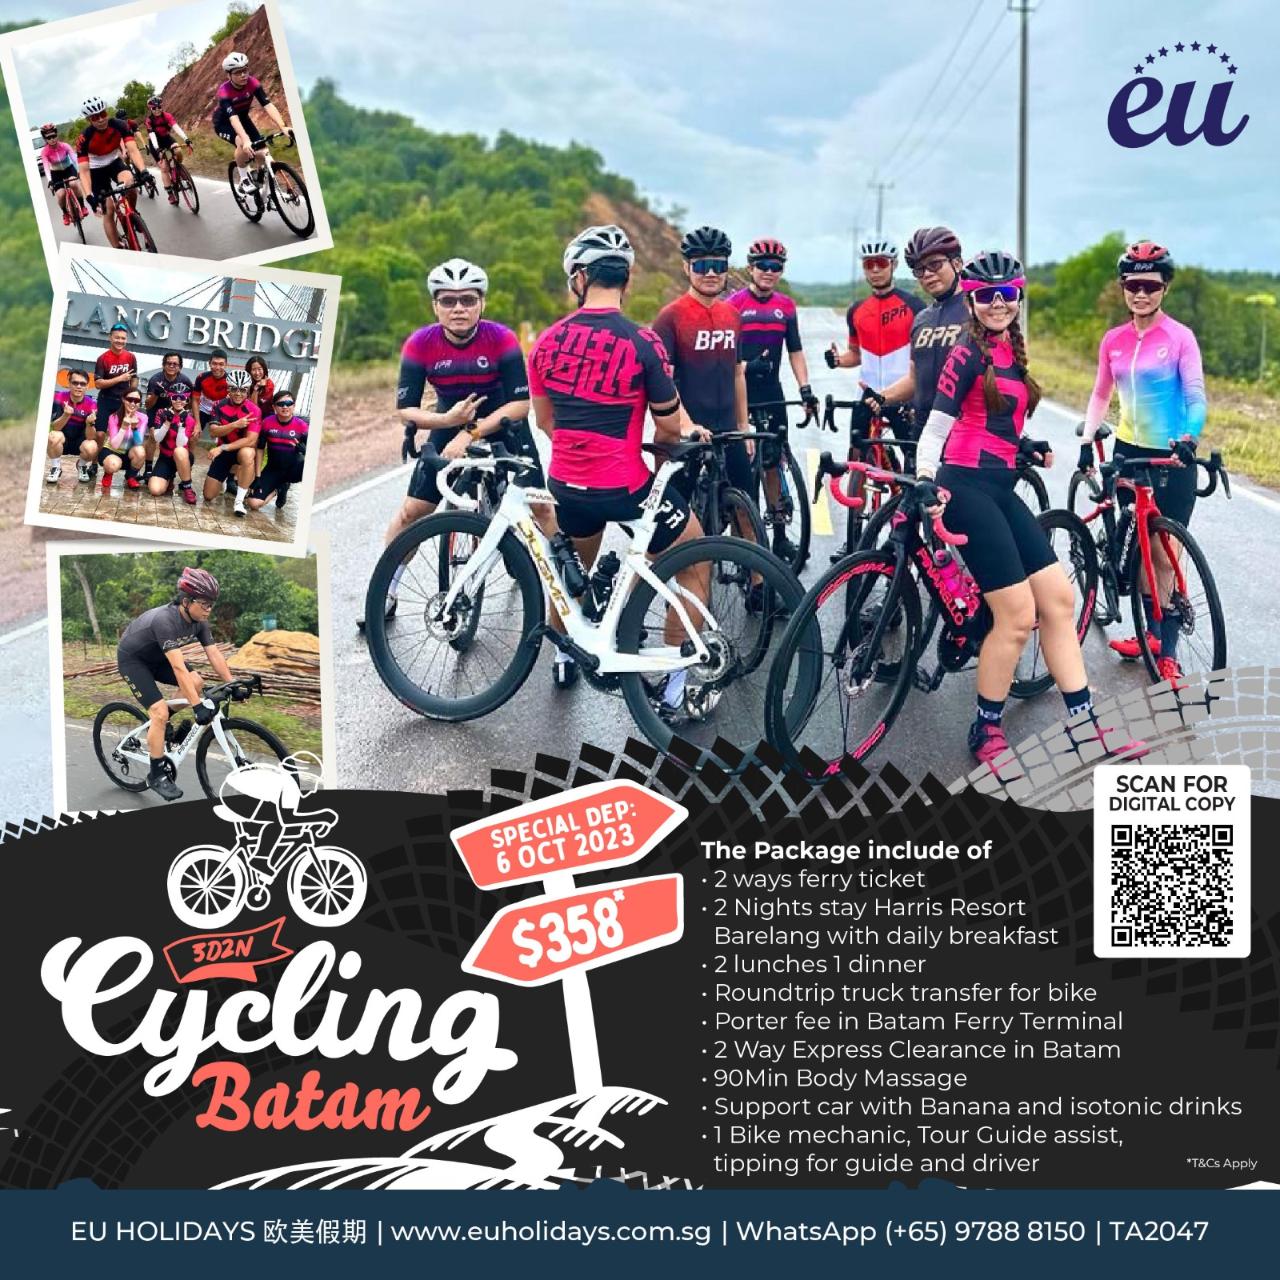 3 Days 2 Nights Batam Cycling Special Departure 6 Oct